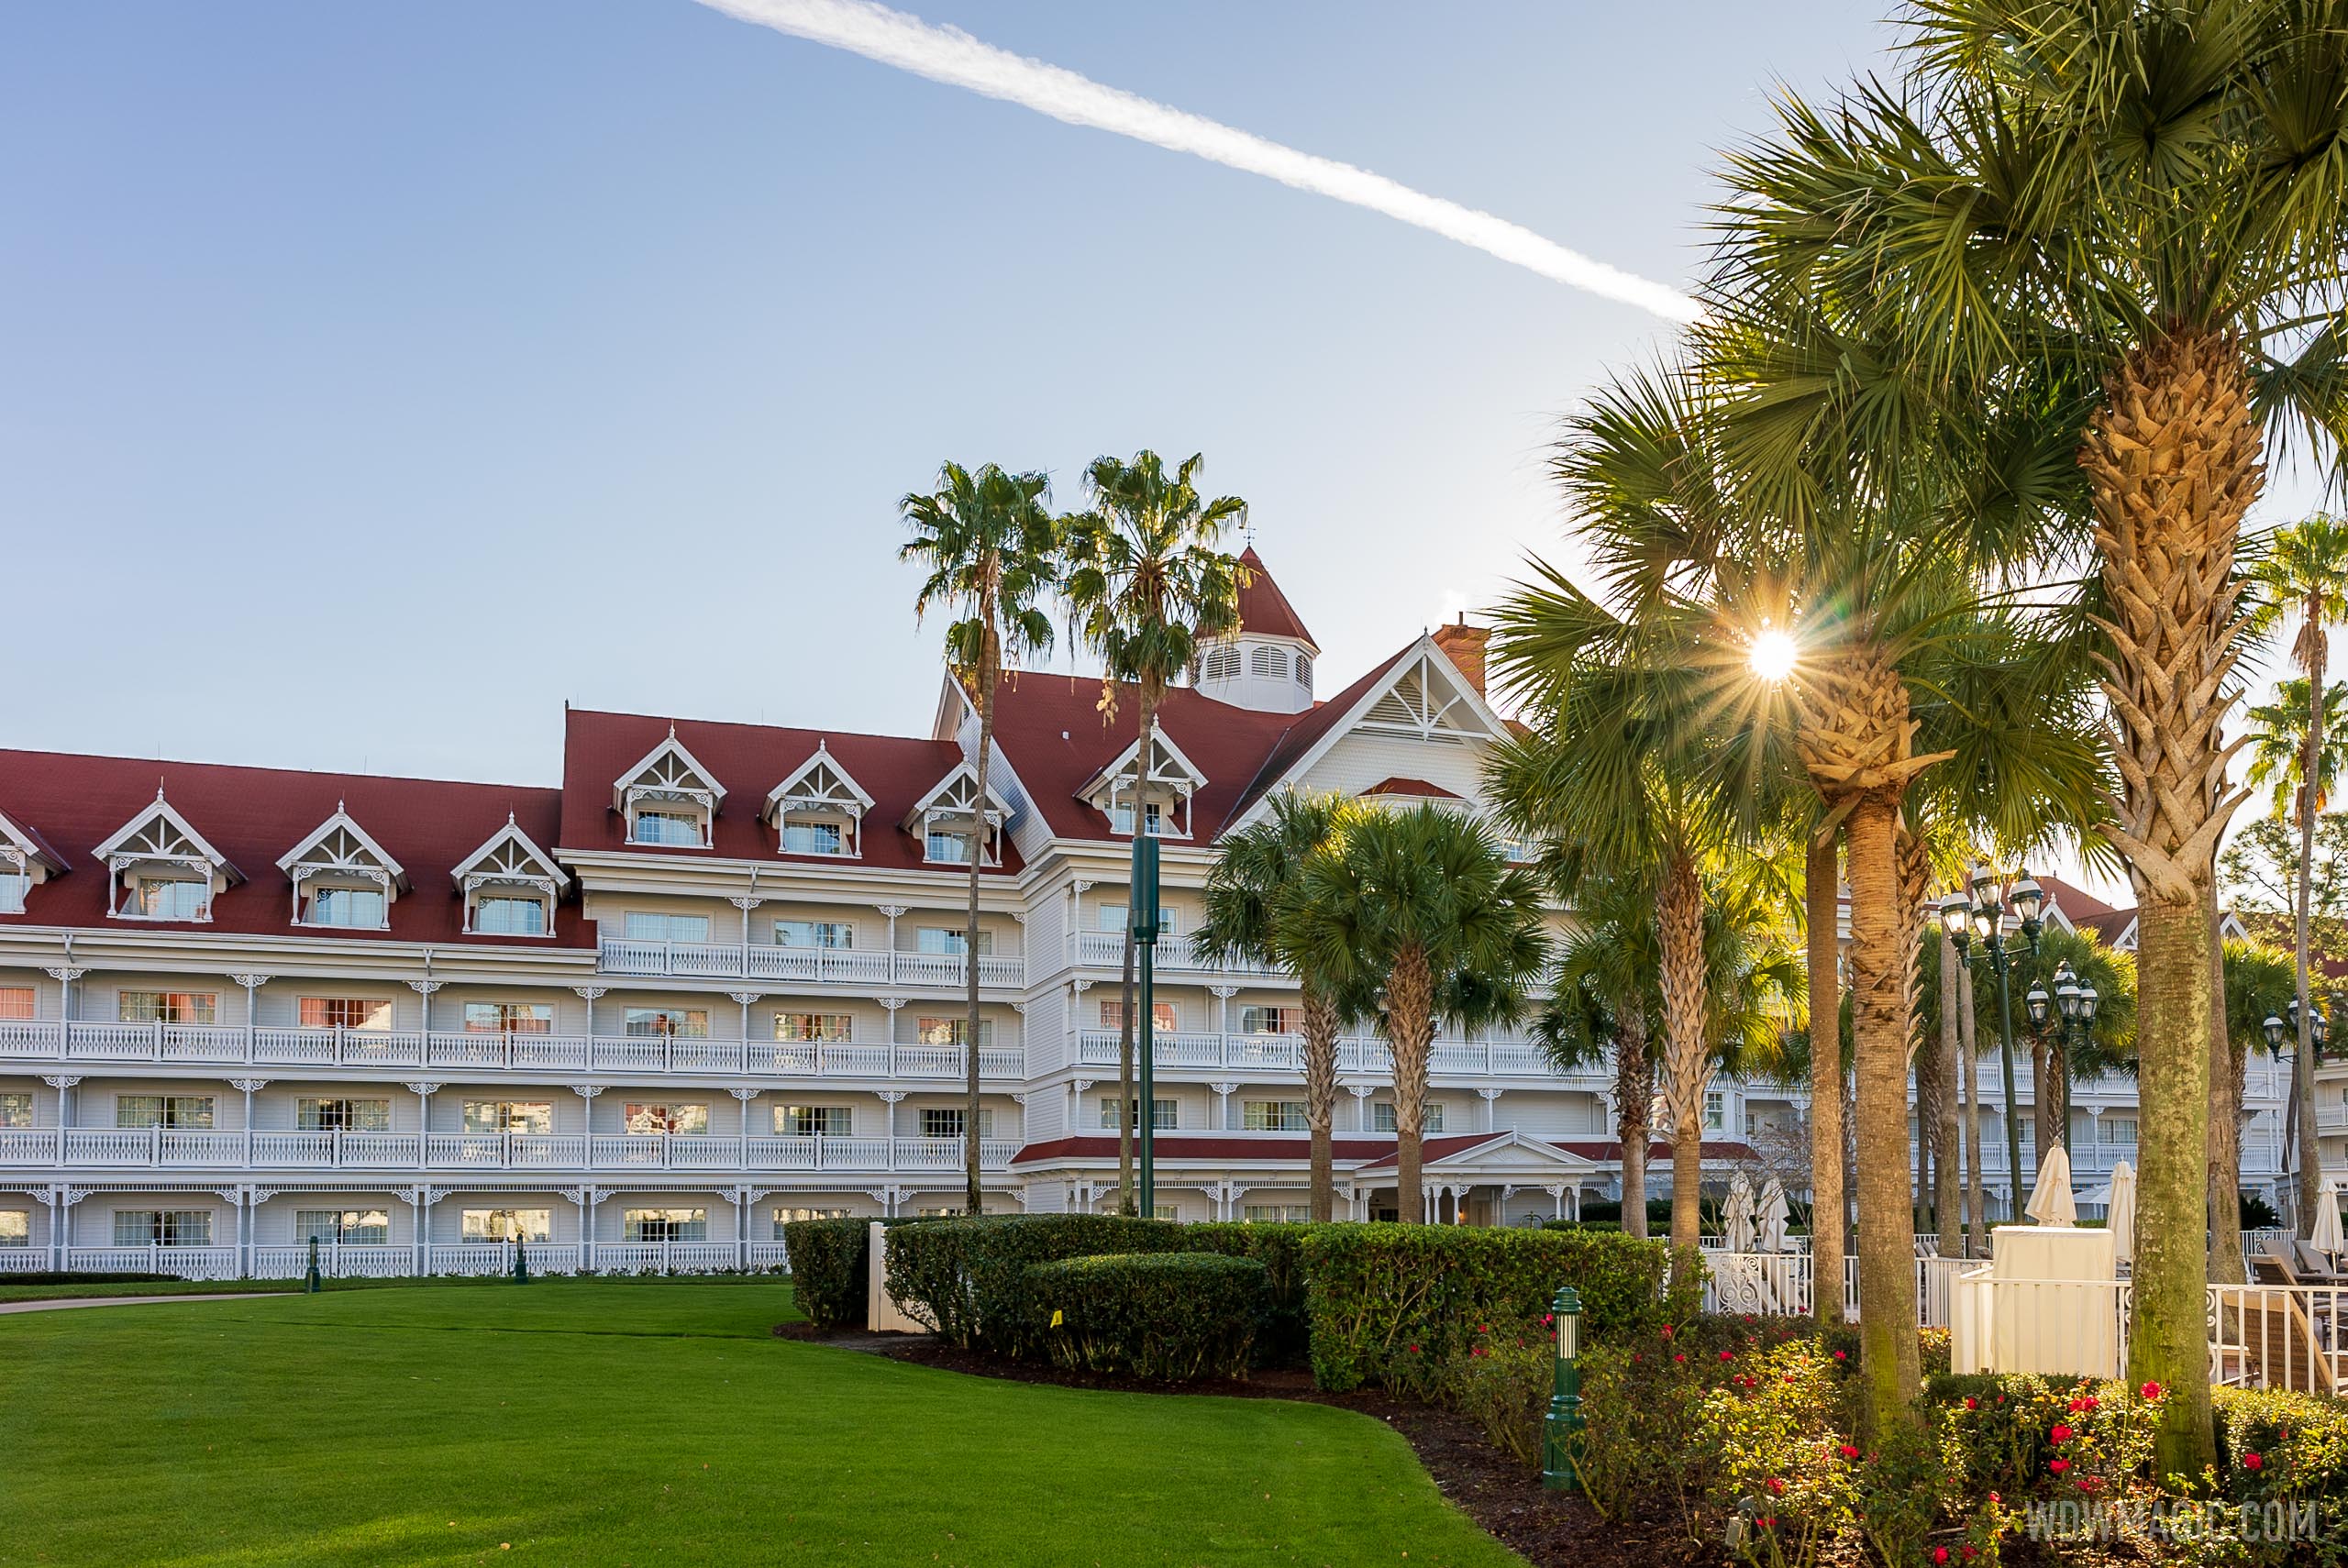 5G cell towers at Disney’s Grand Floridian Resort